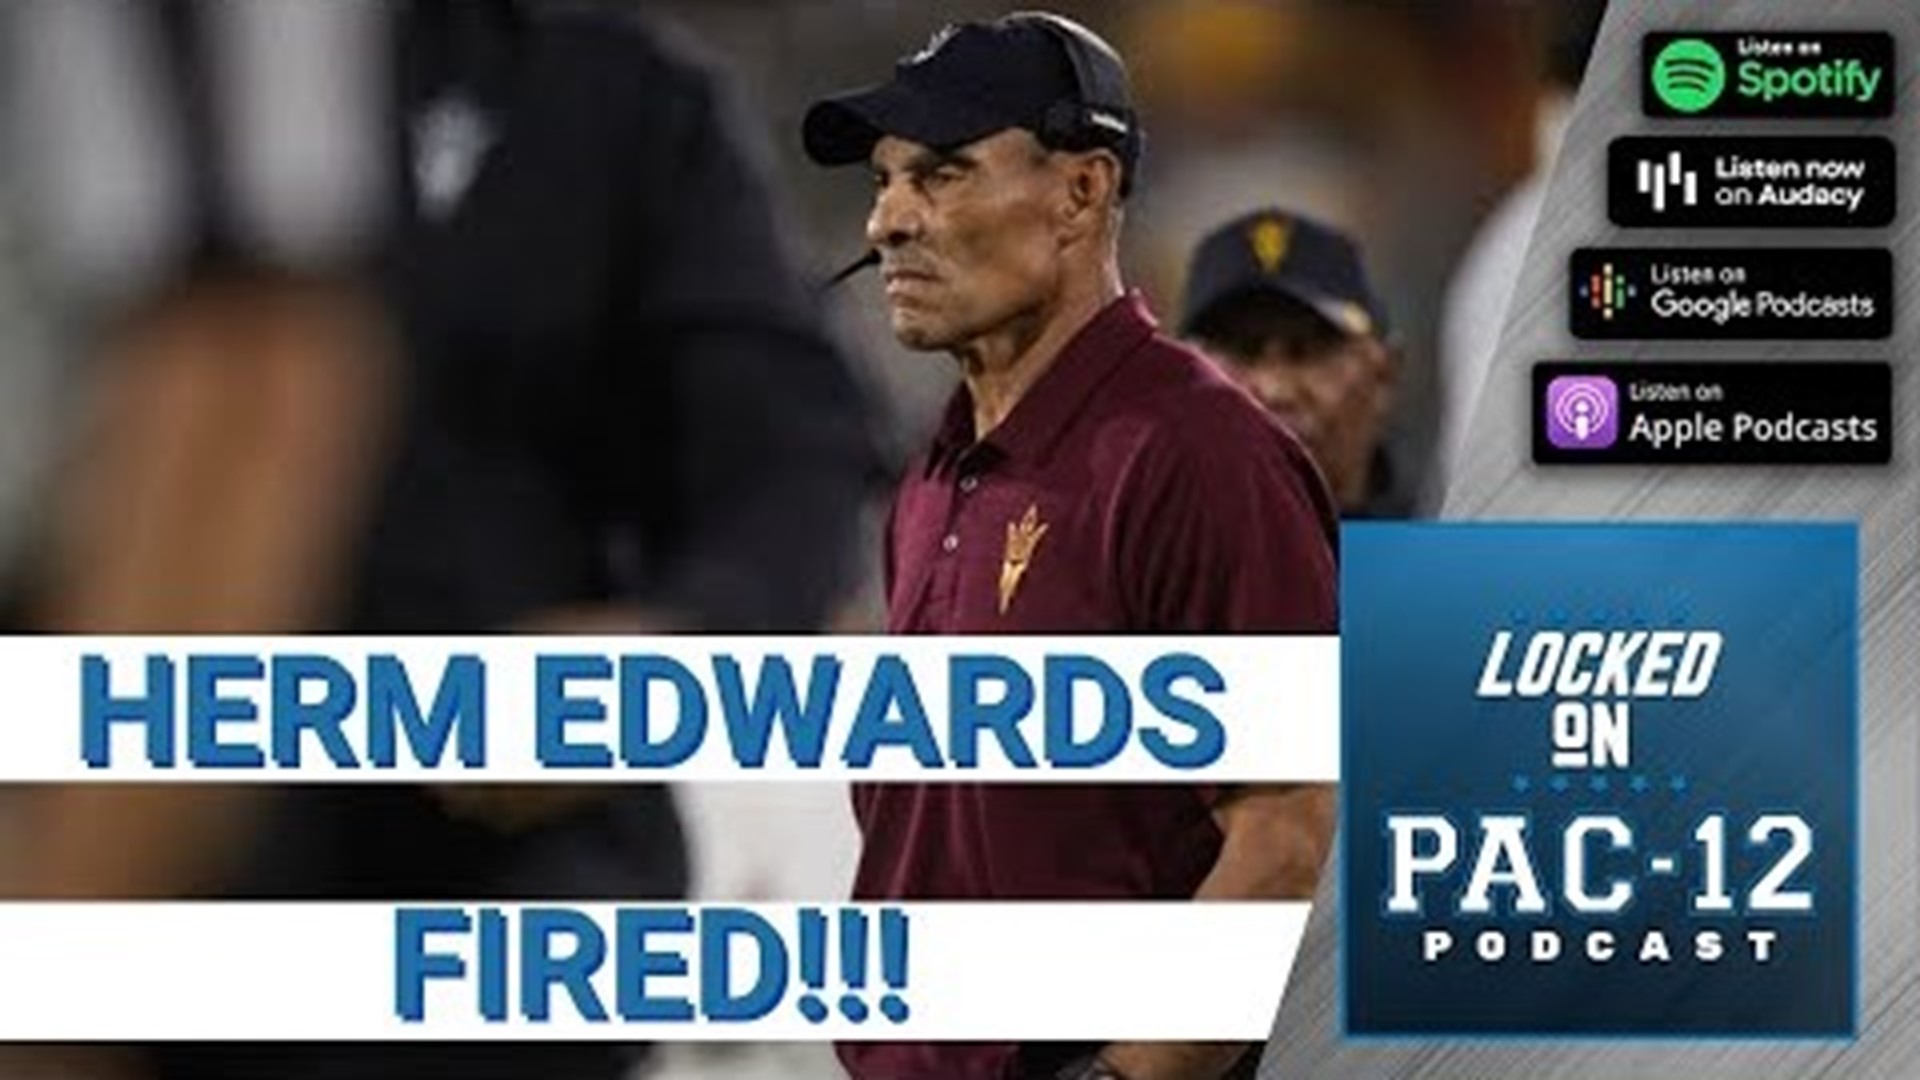 After a 1-2 start in his 5th season in Tempe, Herm Edwards and the ASU administration have agreed to part ways following the upset loss to Eastern Michigan.